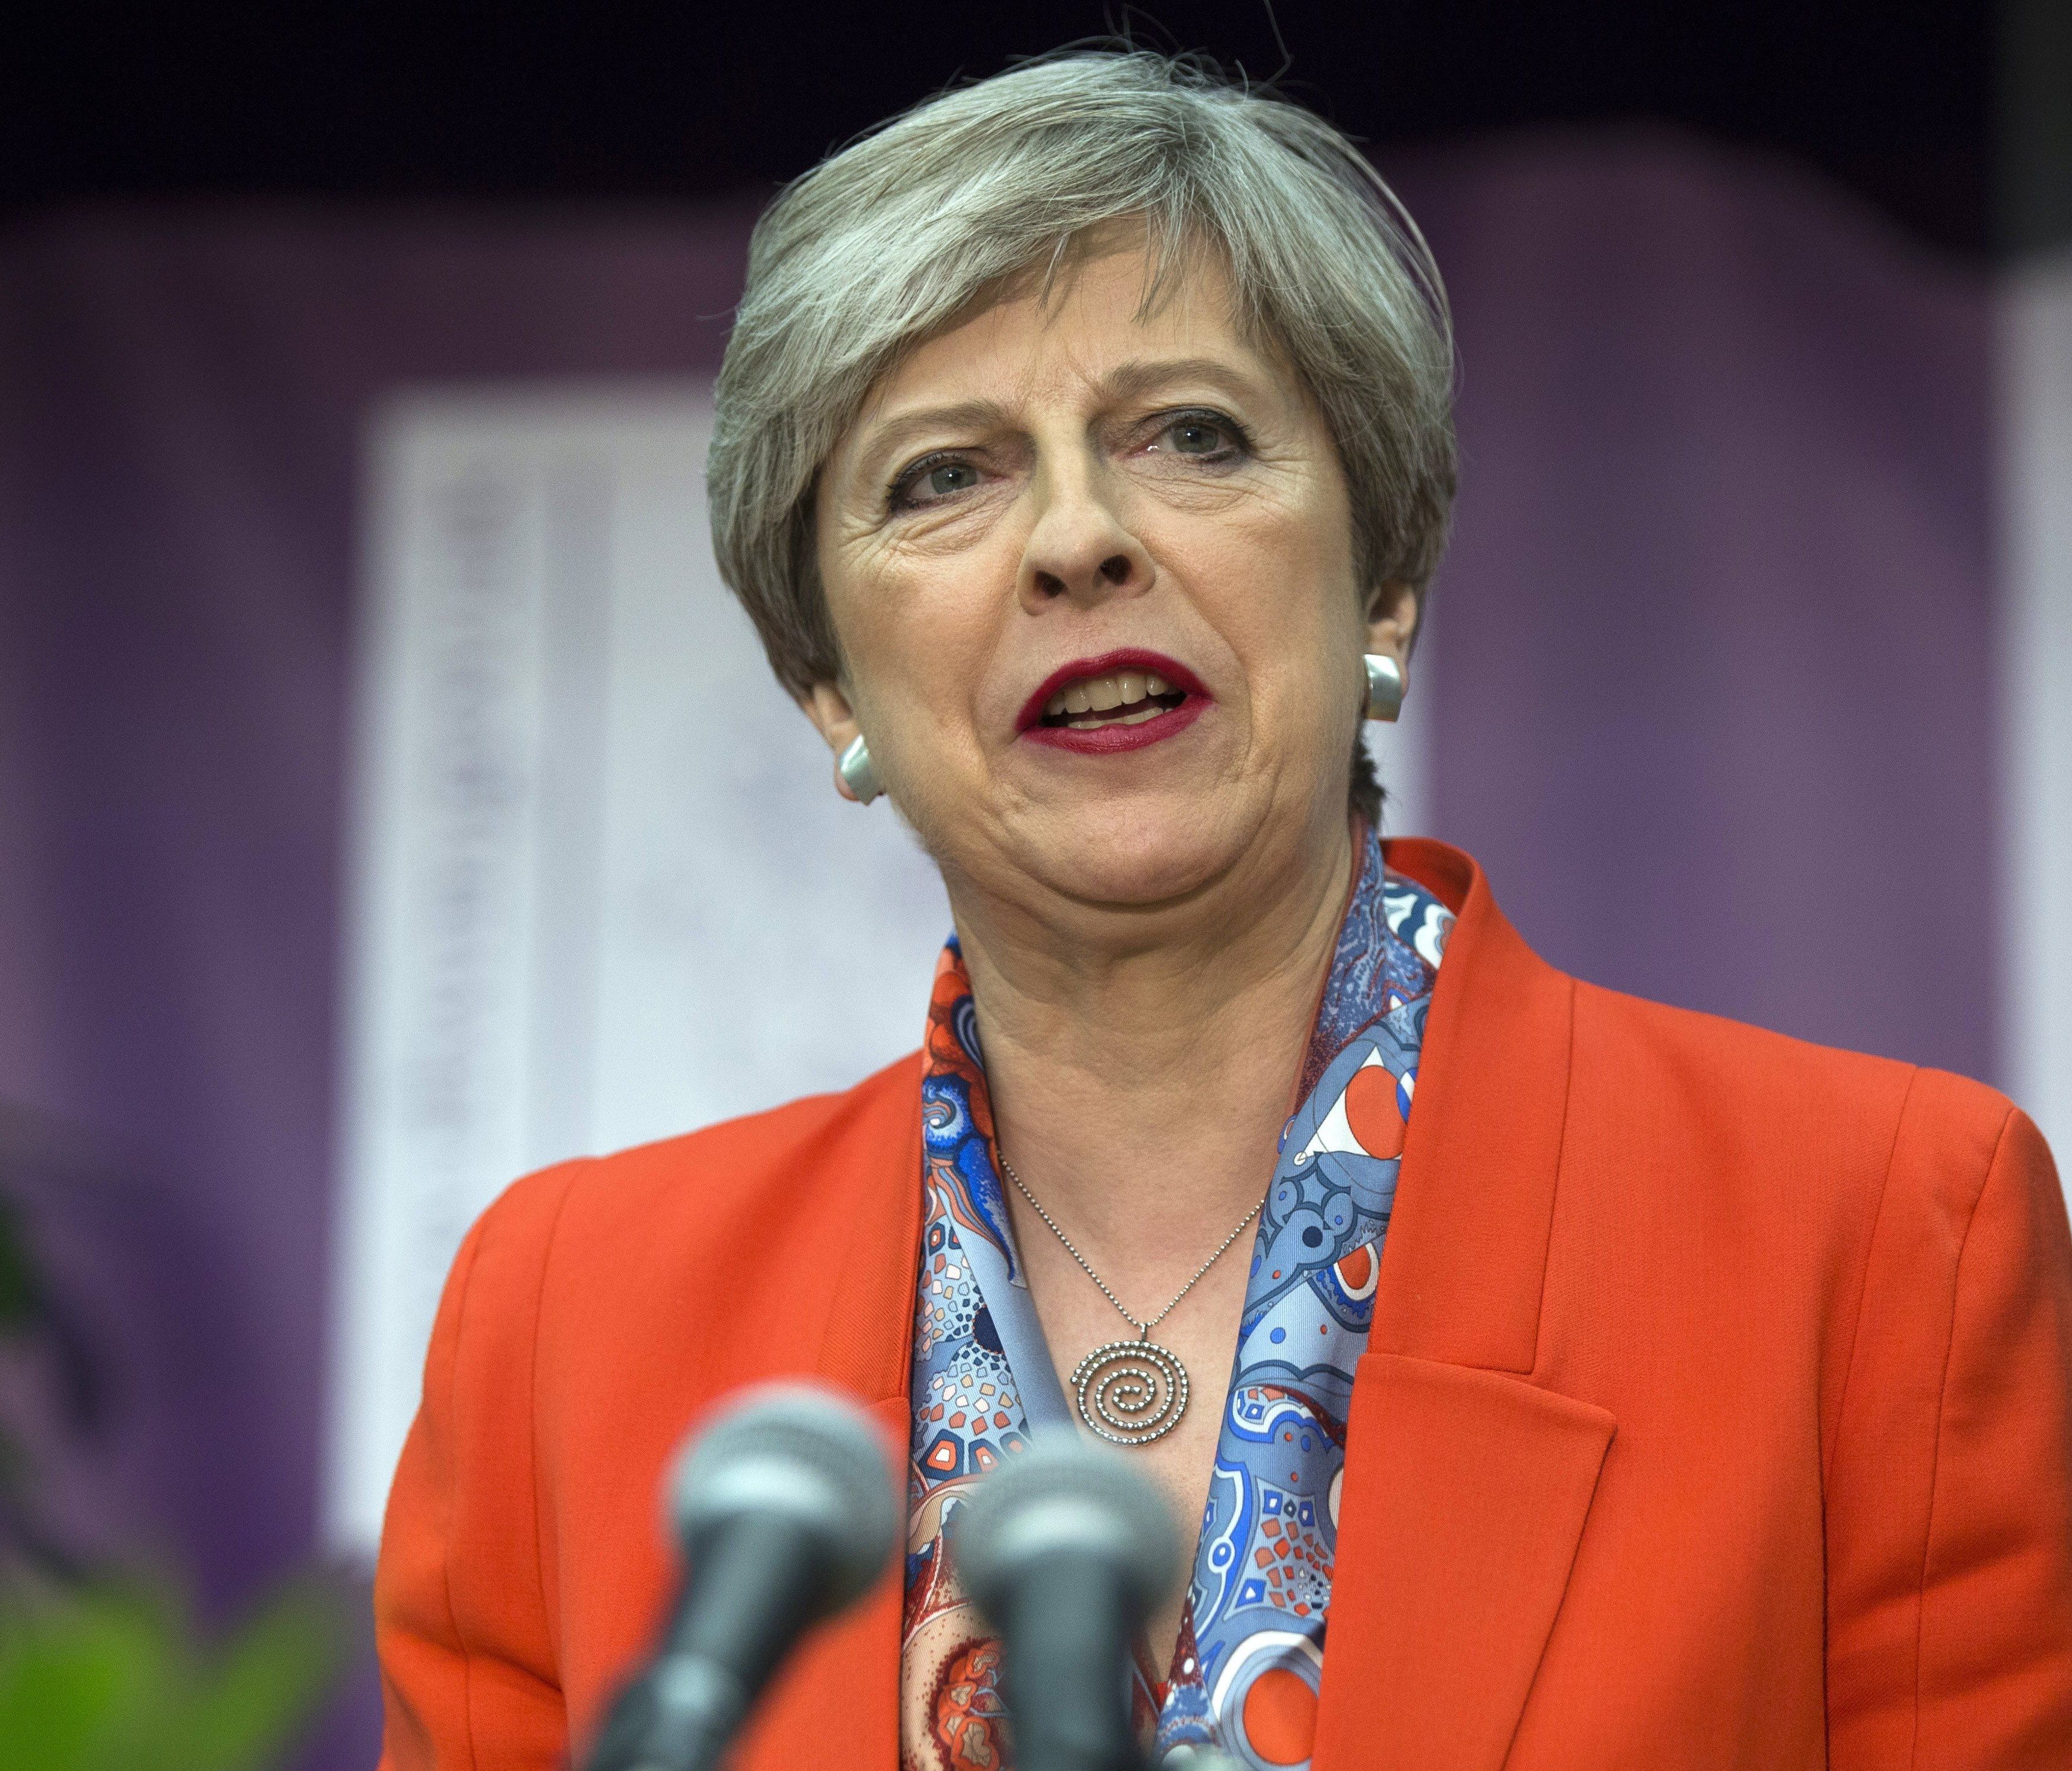 British Prime Minister Theresa May delivers a victory speech at the Magnet Leisure Centre after being declared the winner of the vote in the constituency of Maidenhead, England, on June 9, 2017.